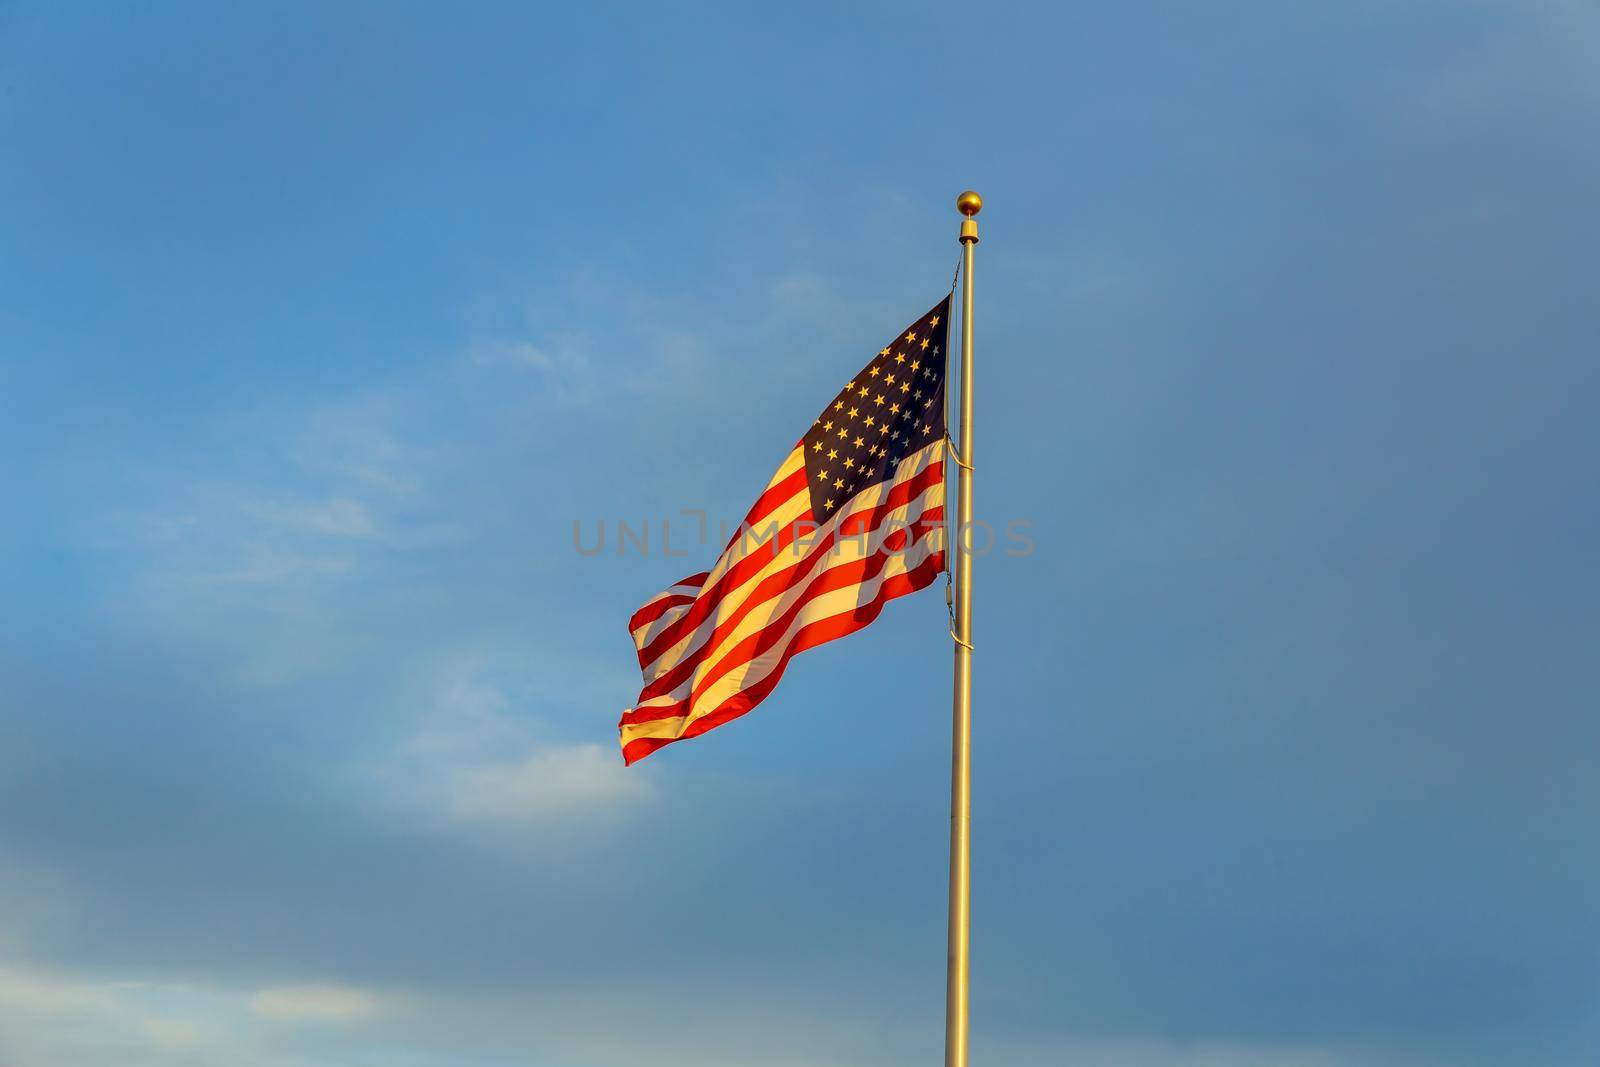 American flag flagpole waving in the wind against clouds, blue sky